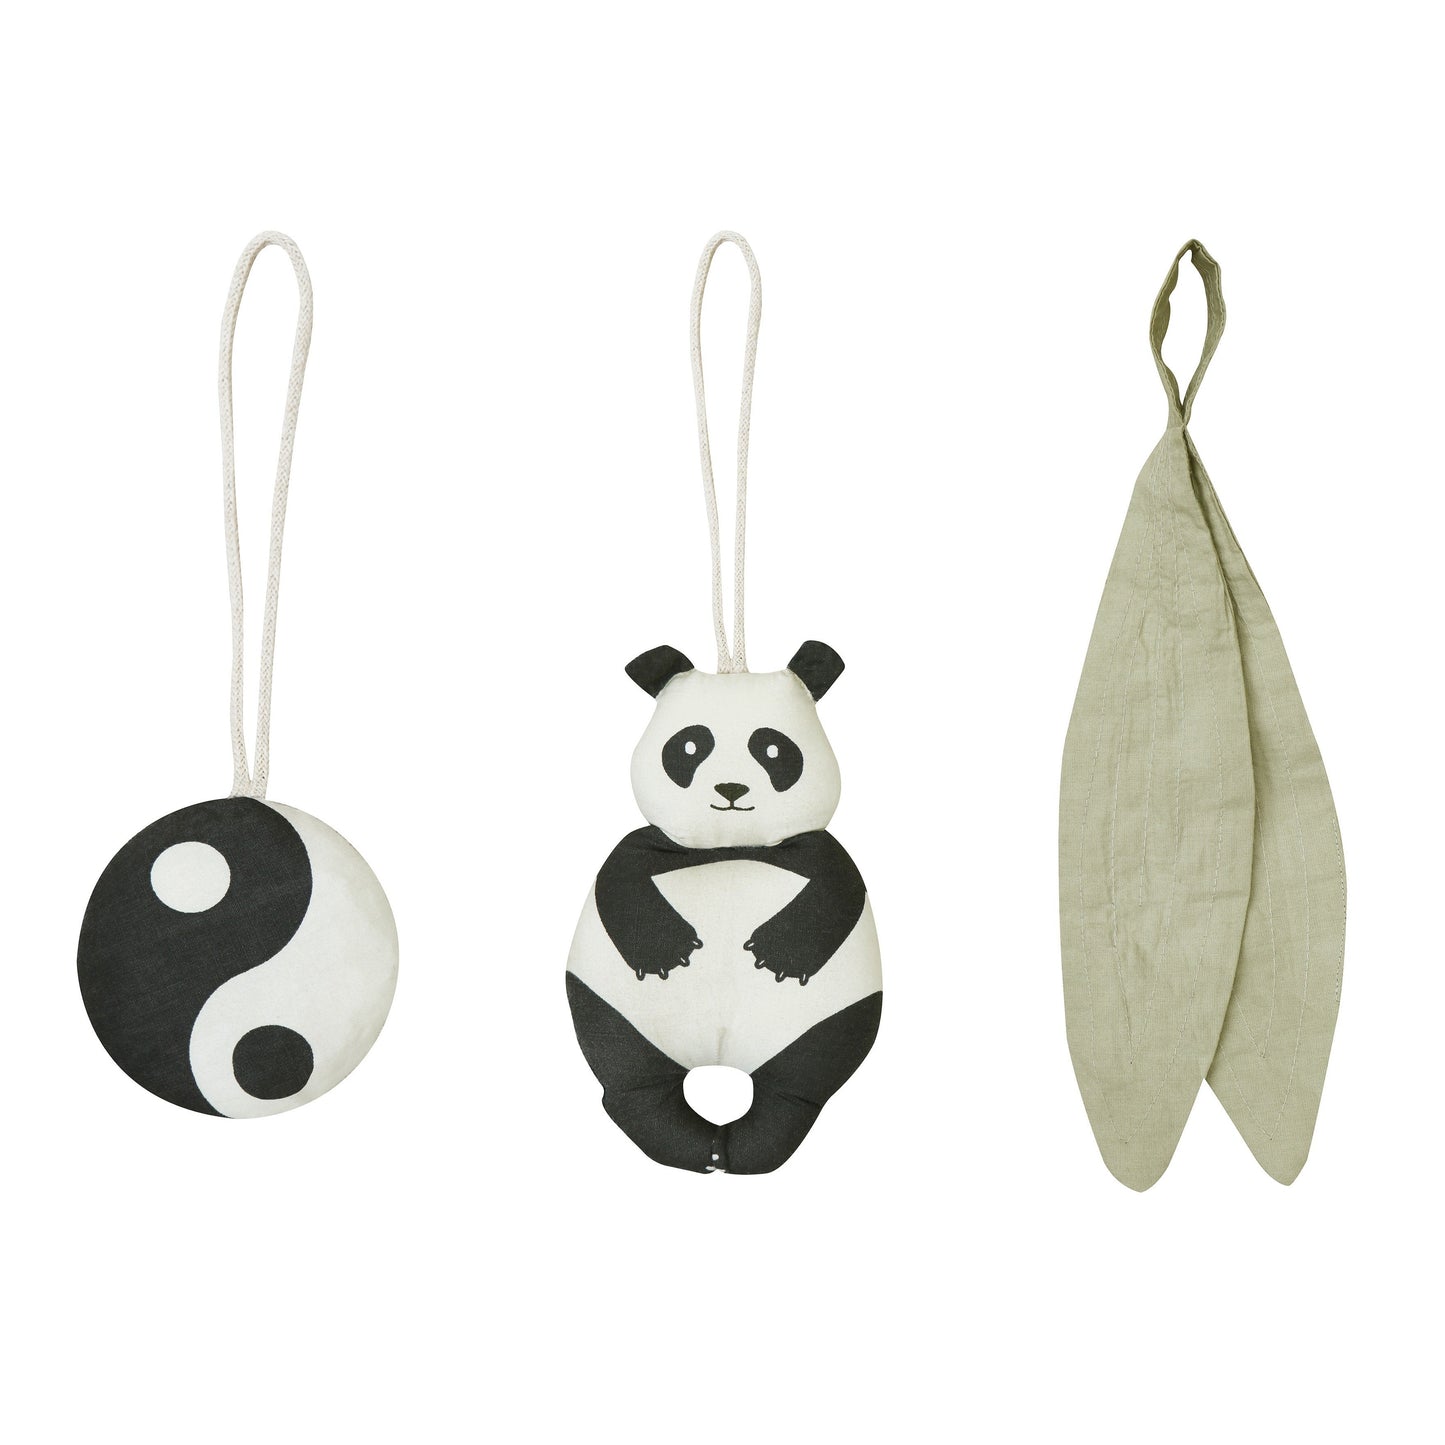 Lorena Canals Set of 3 Baby Gym Rattle Toys - Panda